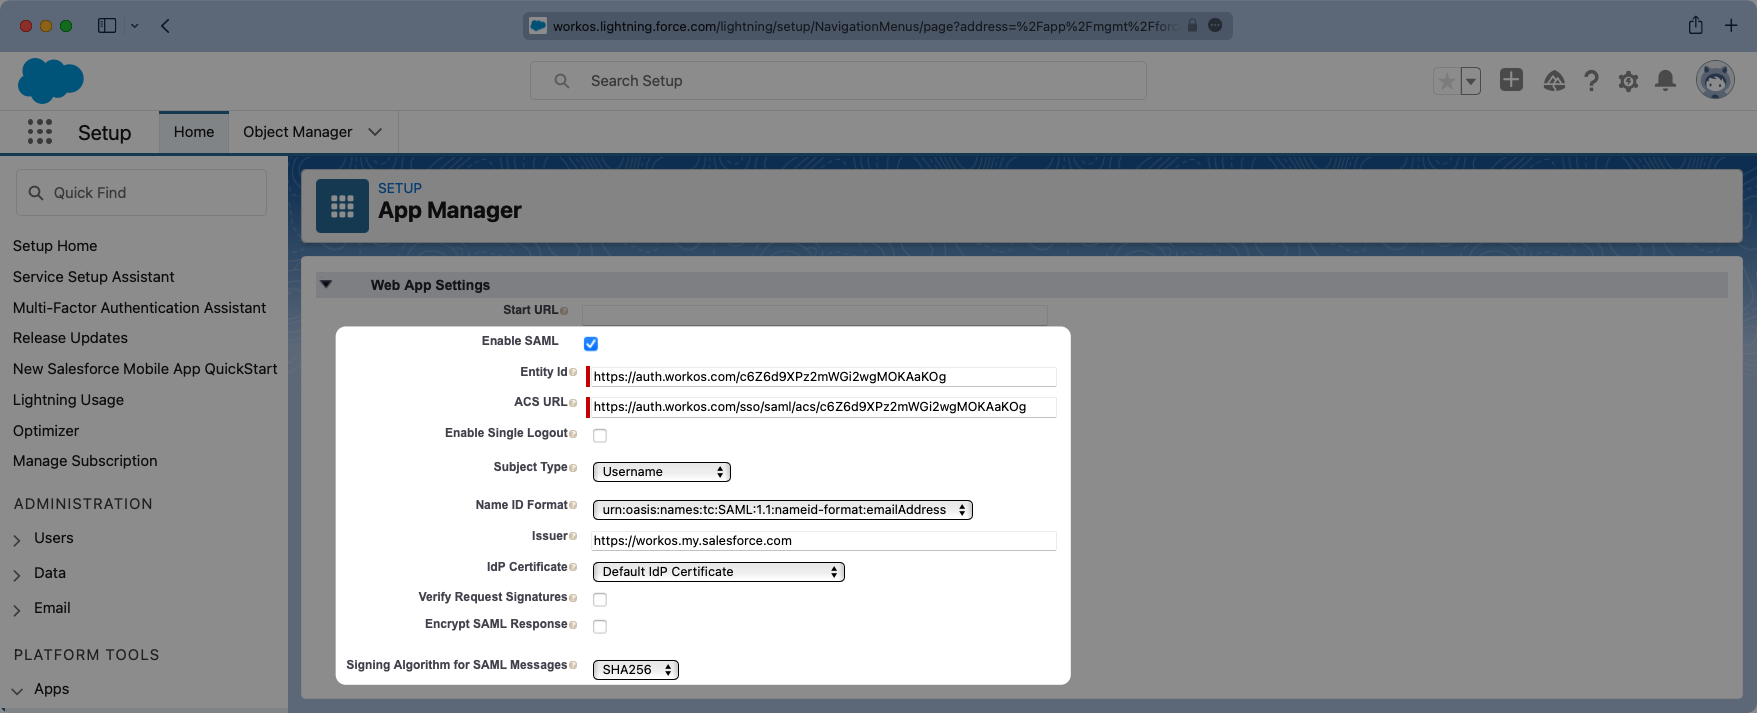 A screenshot showing where to place the WorkOS ACS URL and SP Entity ID in the Salesforce dashboard.